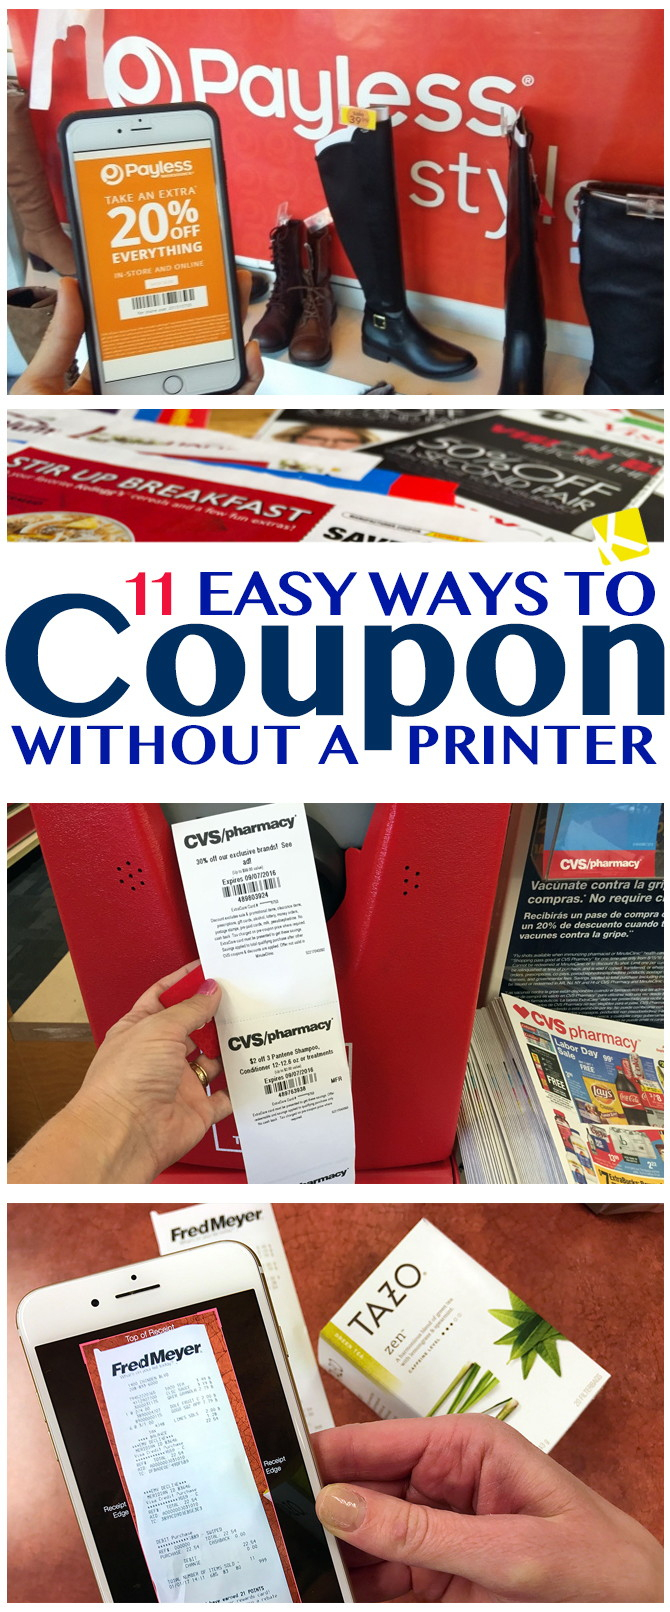 11 Easy Ways To Coupon Without A Printer - The Krazy Coupon Lady - Free Printable Coupons Without Coupon Printer